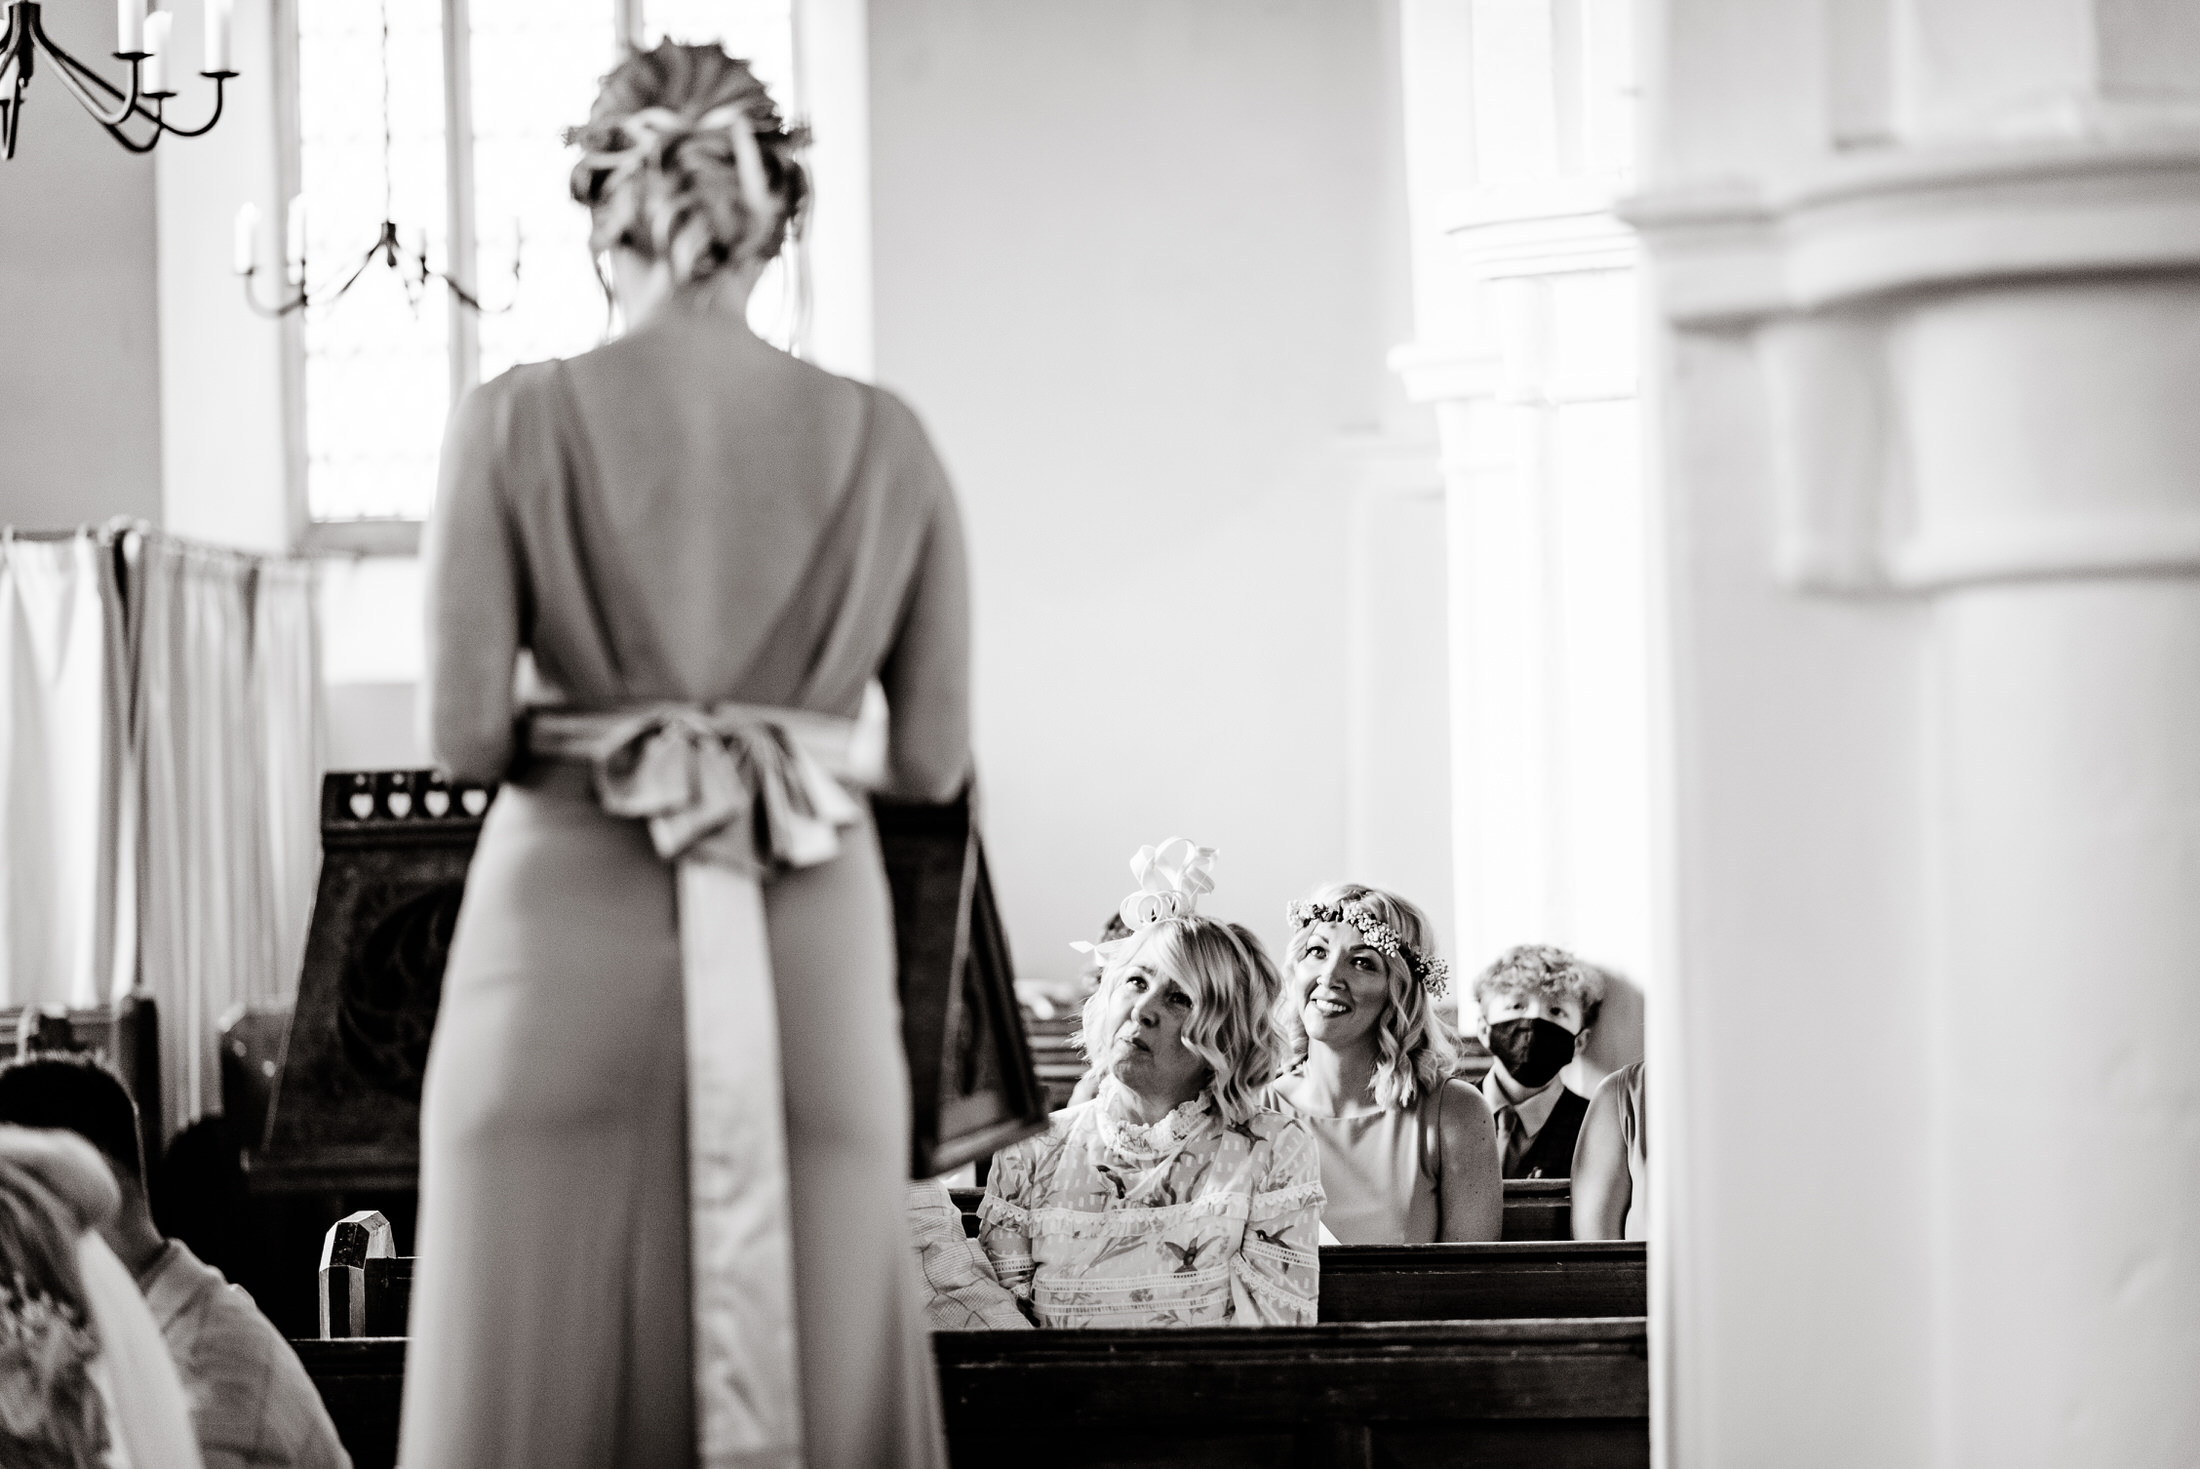 A black and white photo capturing a wedding party, including the bride and bridesmaids, inside a church.